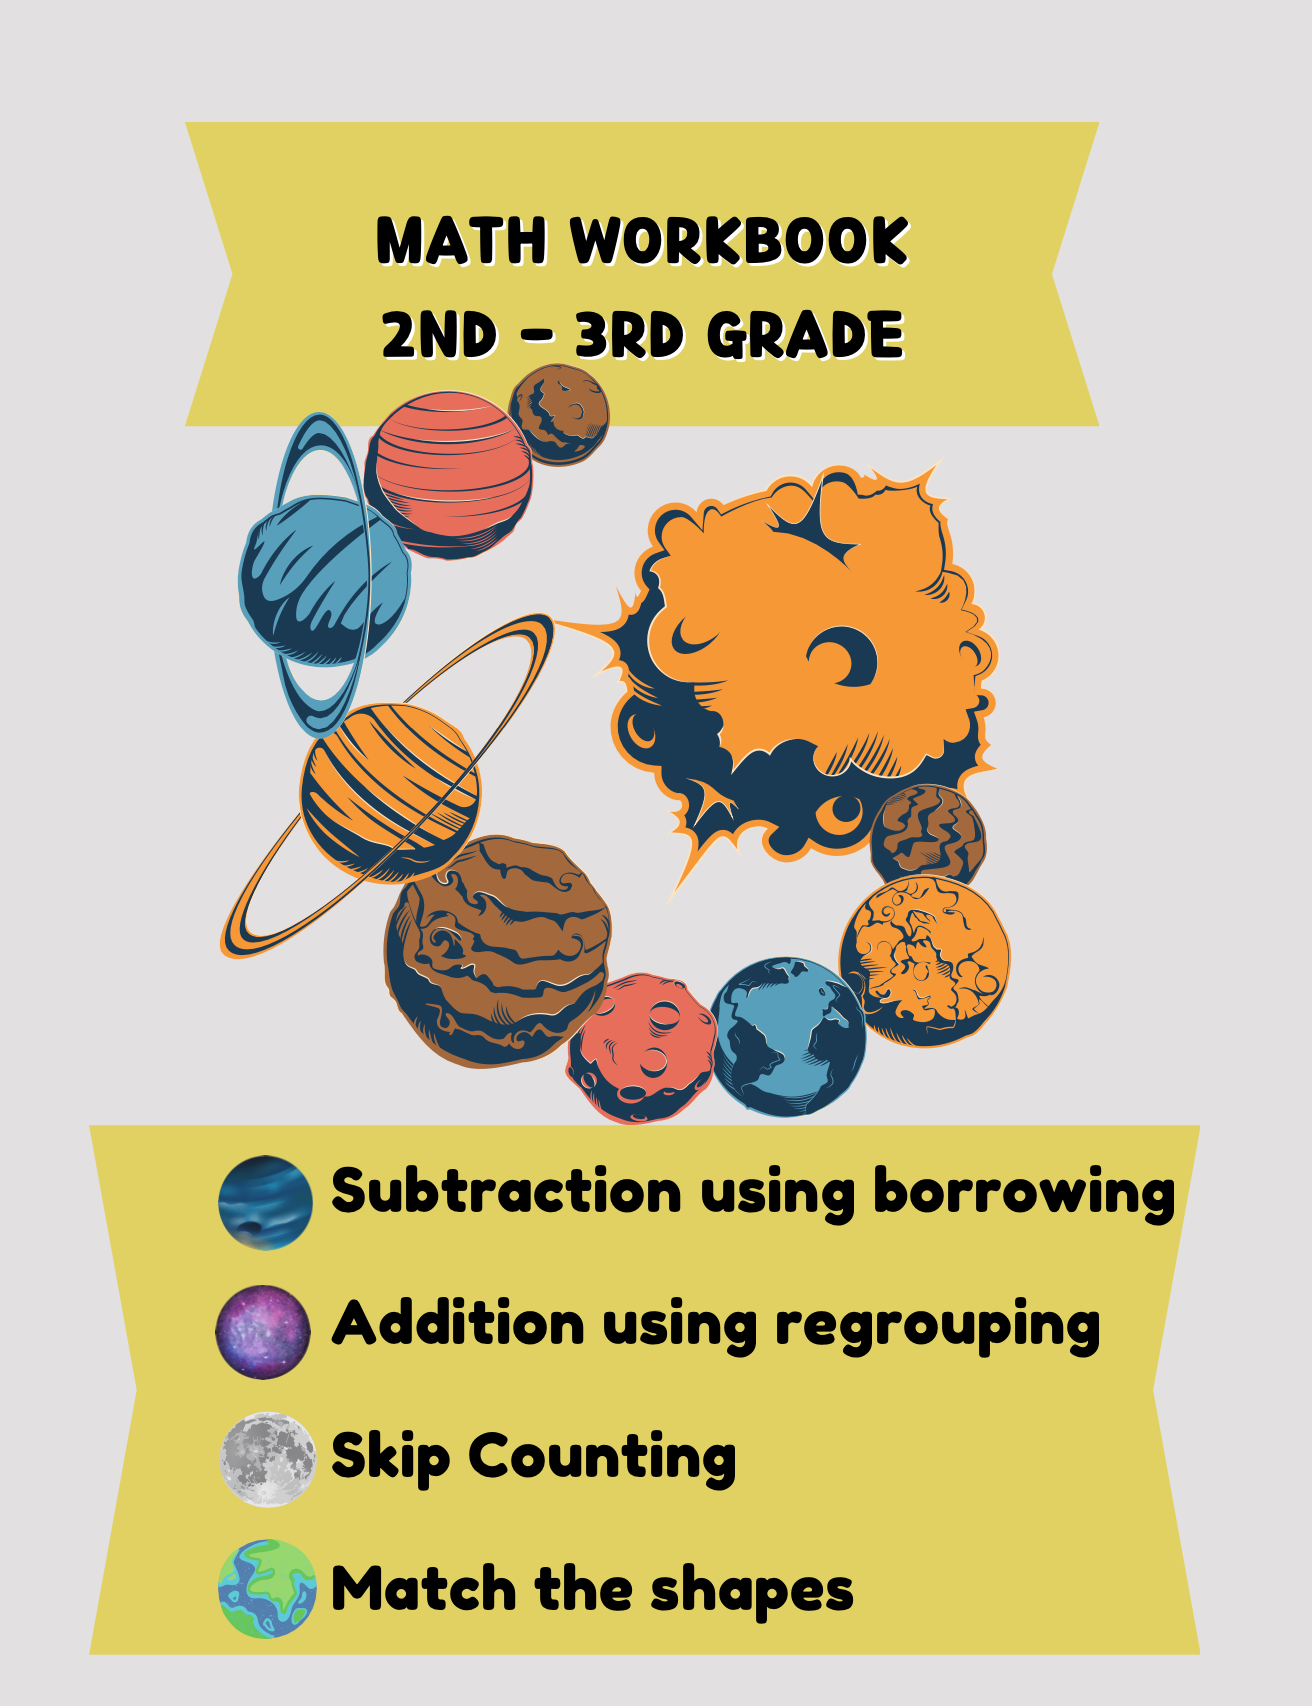 Space Themed Math Worksheets (2nd-3rd Grade)